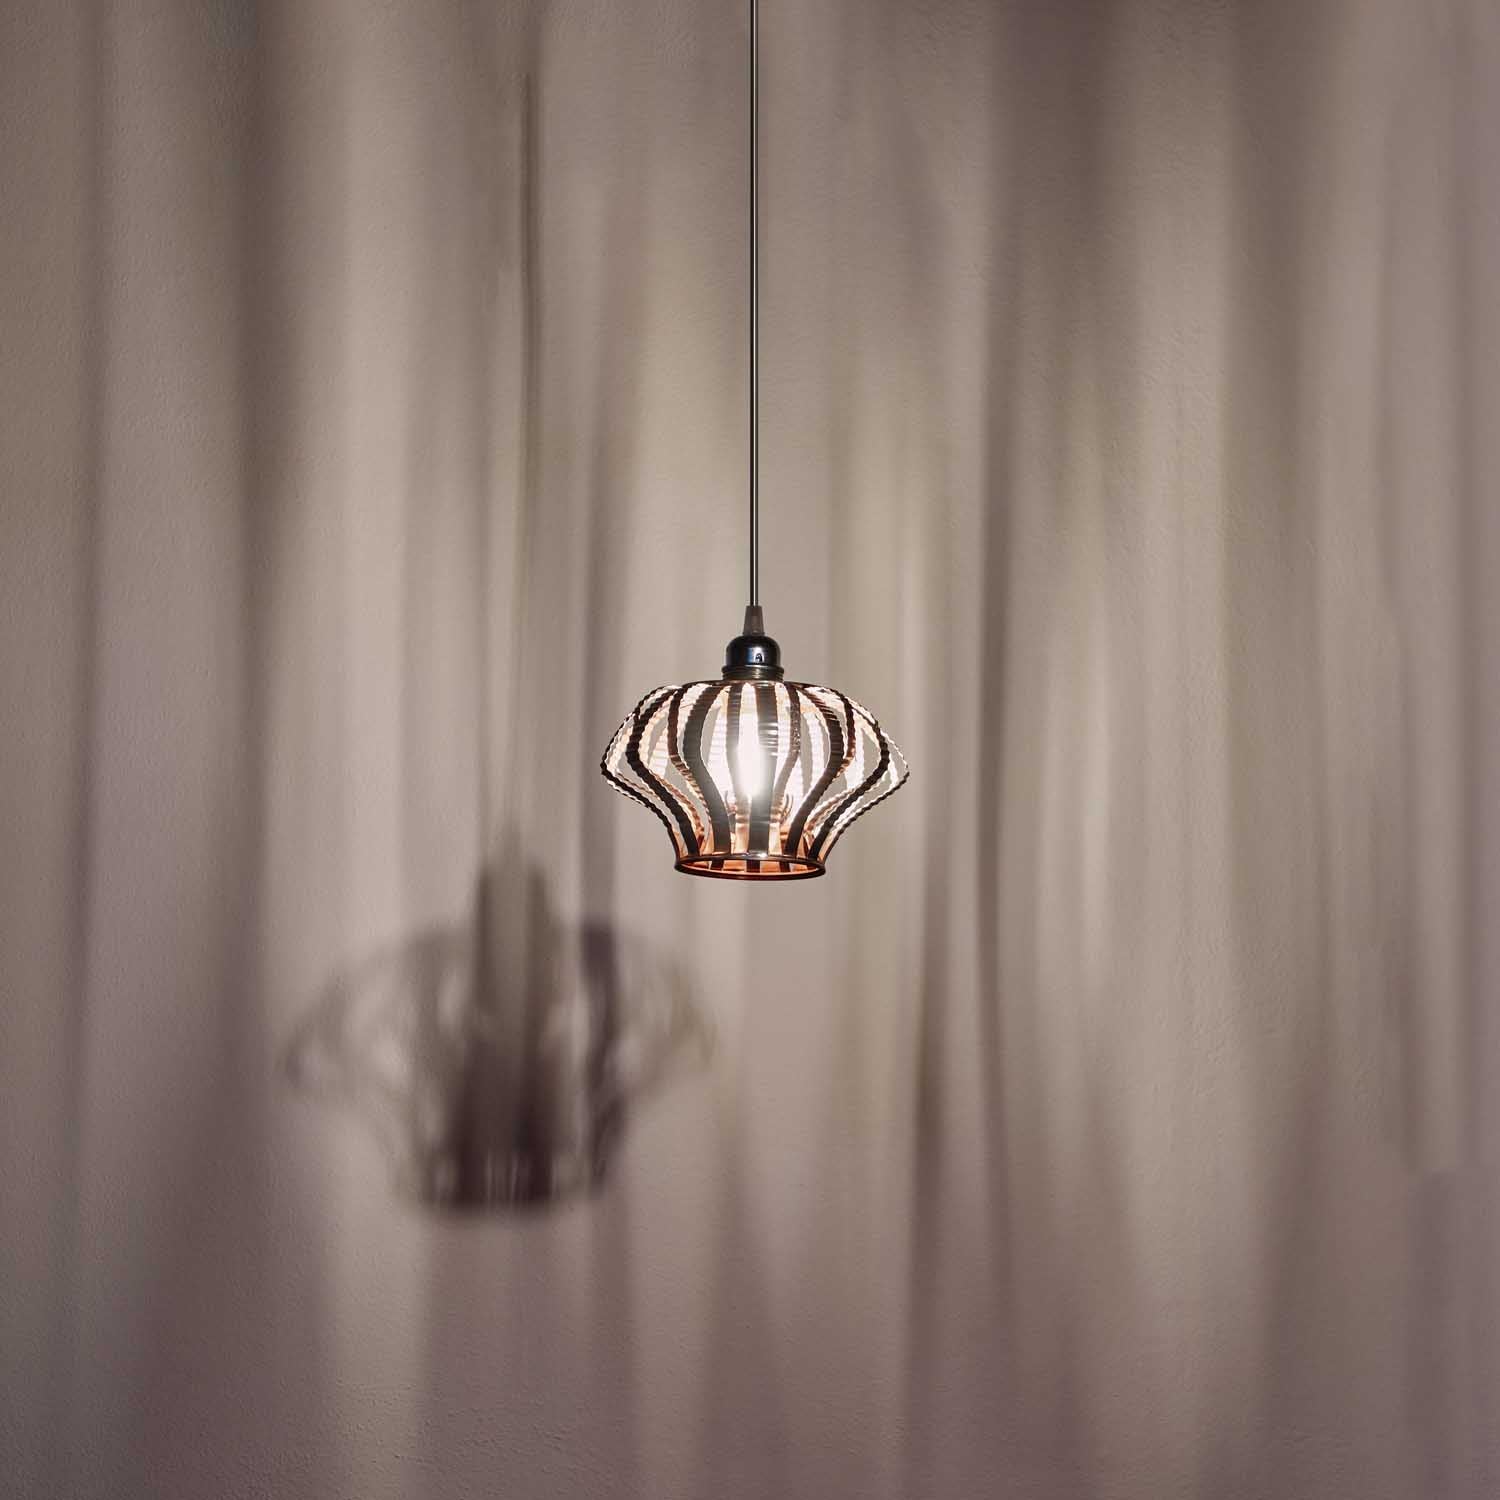 Tiny Hand-Crafted Ceiling Fixture: Sustainable Style